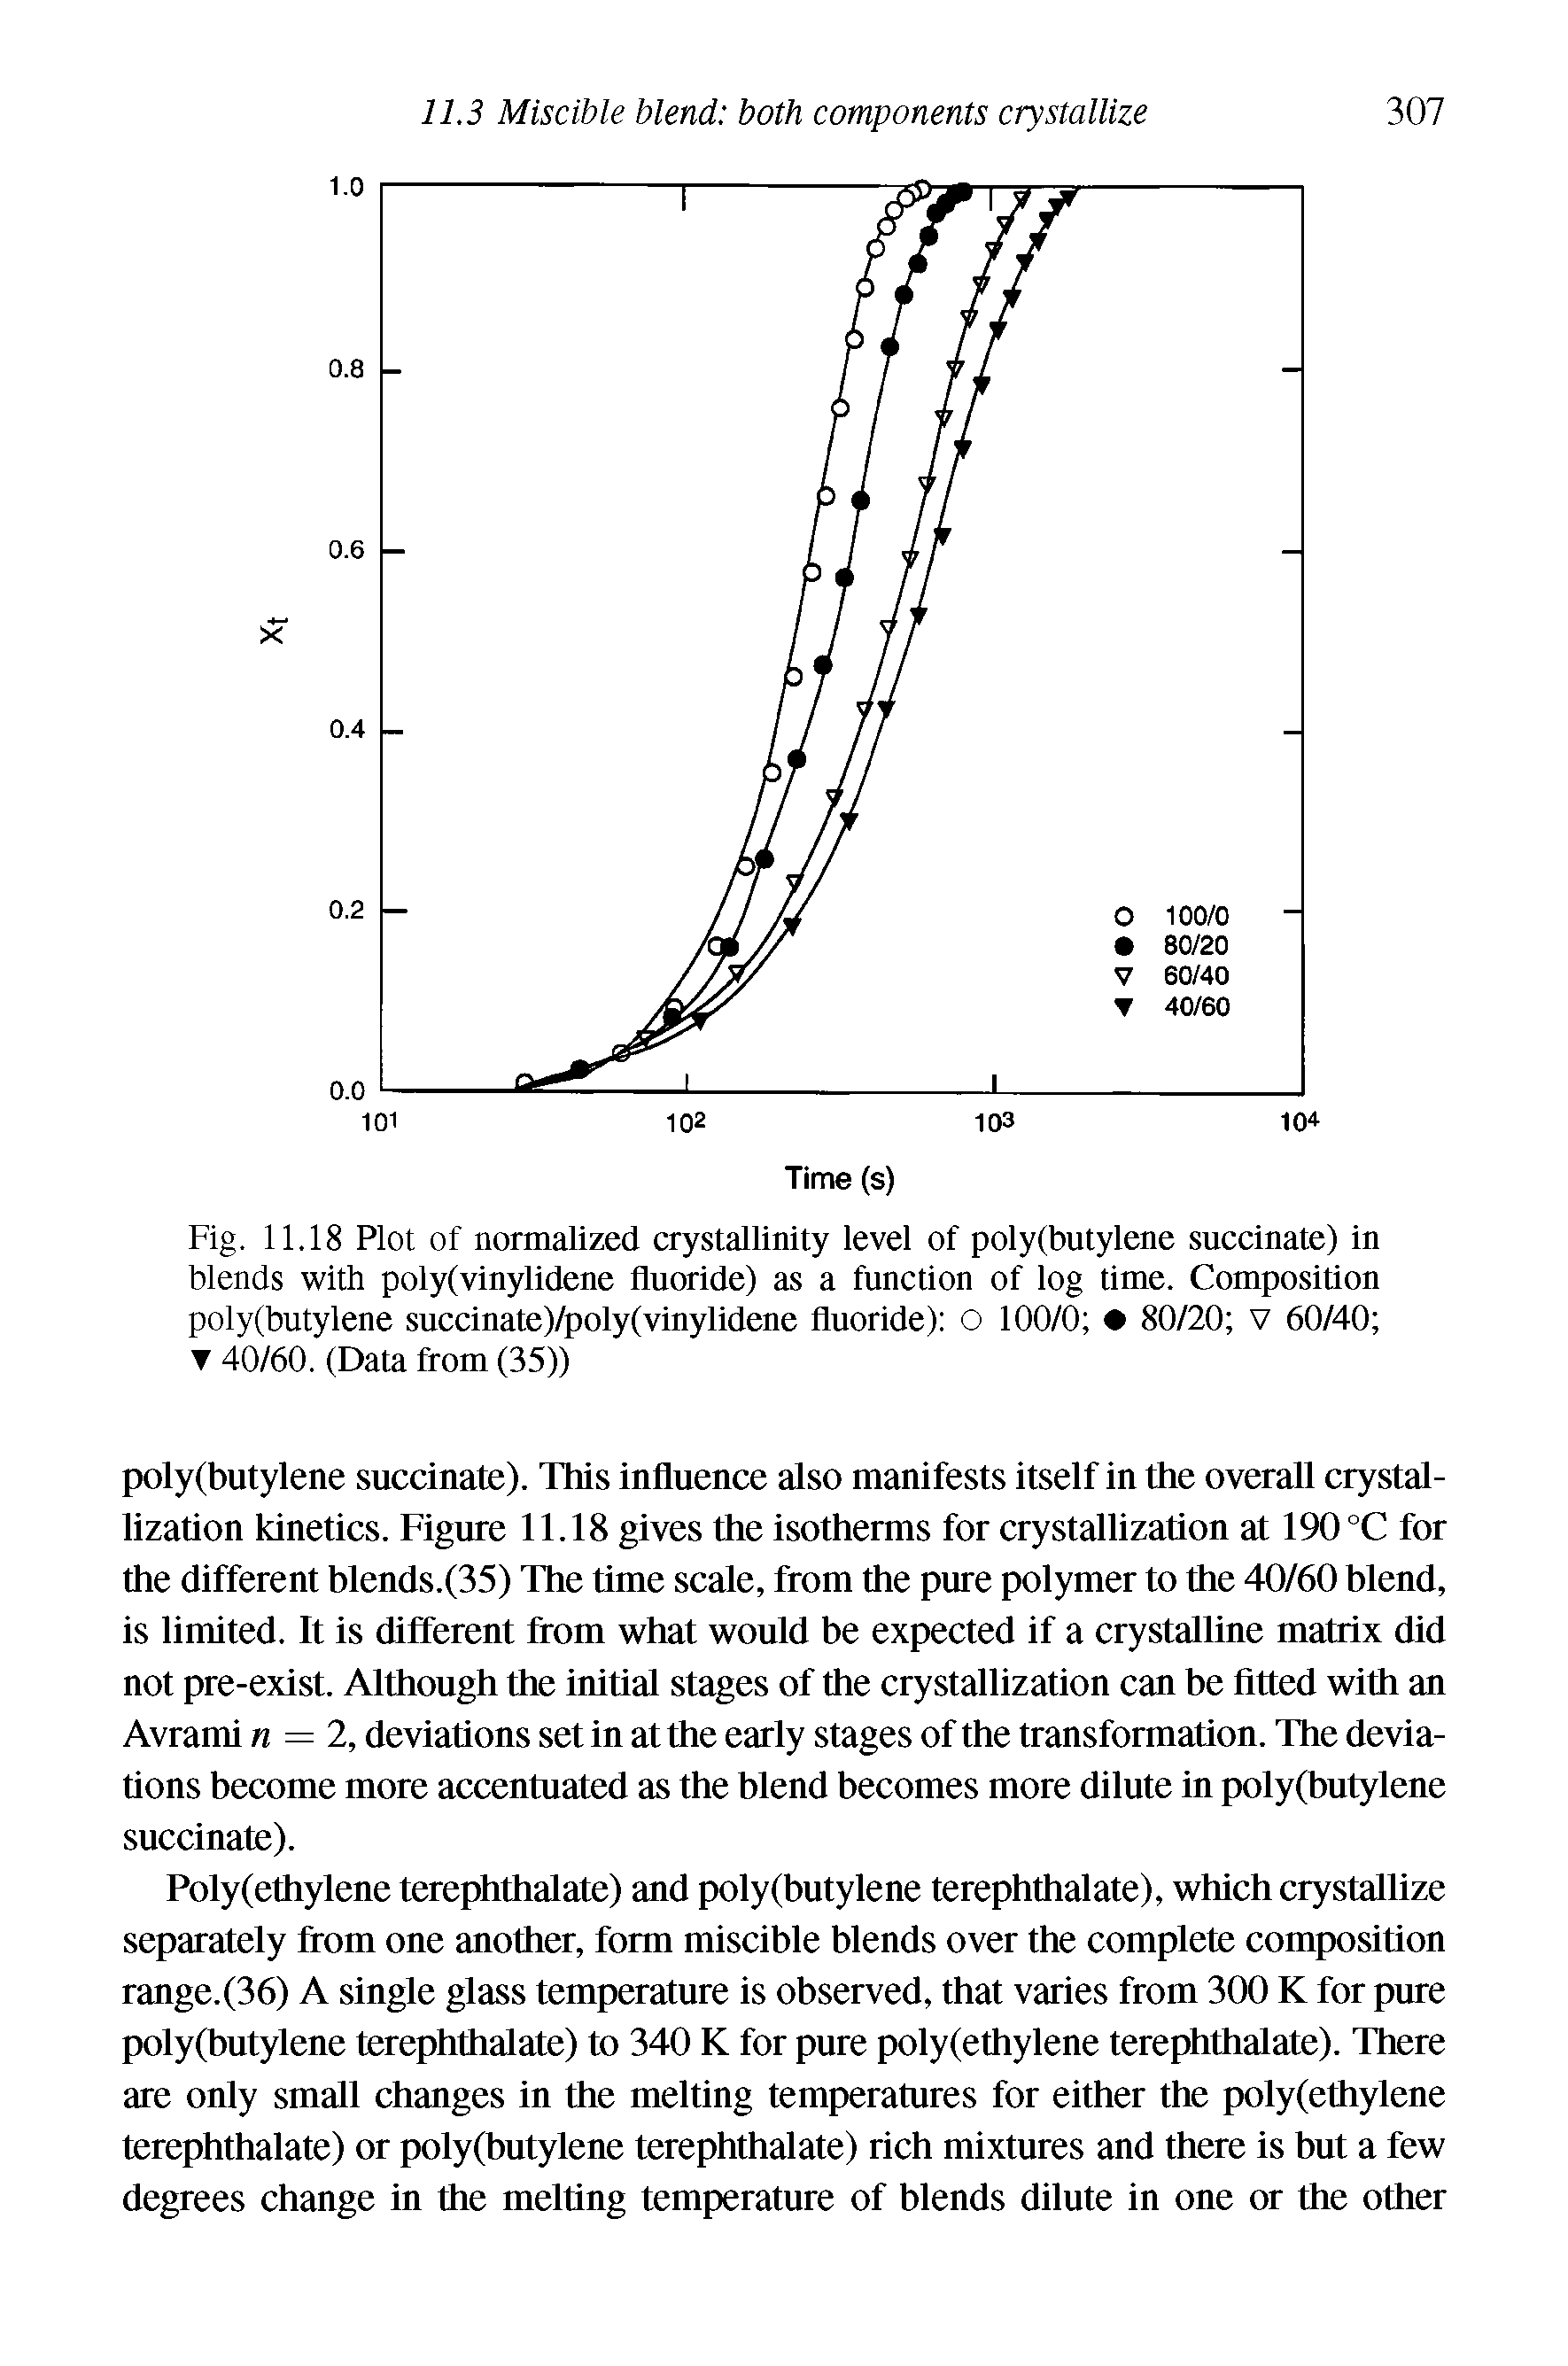 Fig. 11,18 Plot of normalized crystallinity level of poly(butylene succinate) in blends with poly(vinylidene fluoride) as a function of log time. Composition poly(butylene succinate)/poly(vinylidene fluoride) O 100/0 80/20 V 60/40 T 40/60. (Data from (35))...